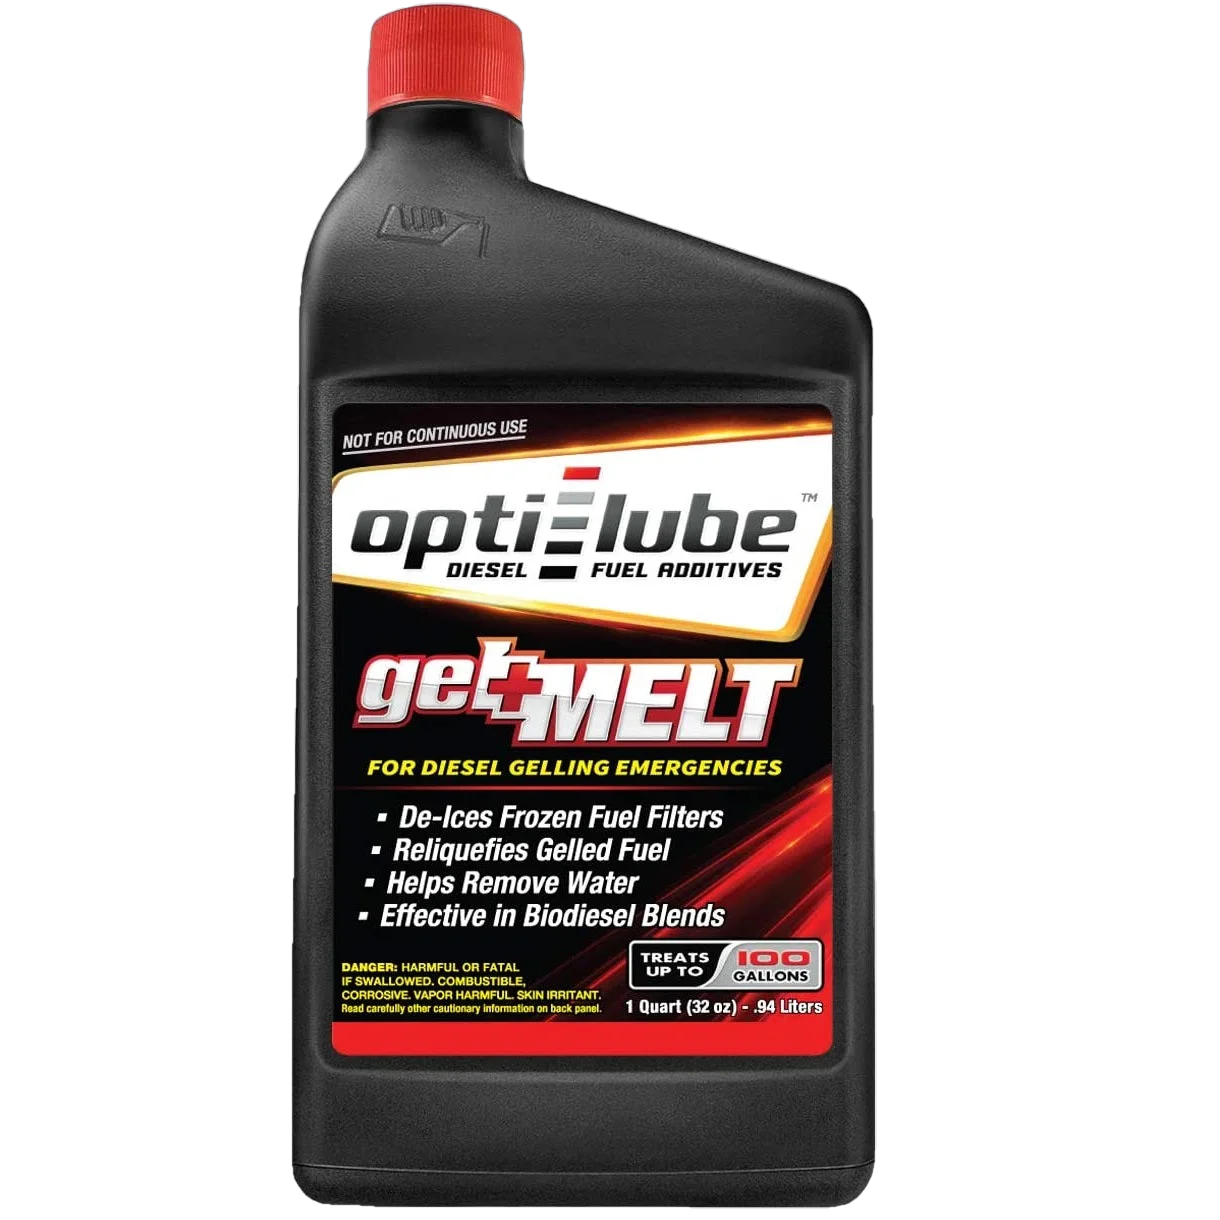 Opti-Lube Gel Melt Diesel Fuel Additive for Emergency Use: Quart (32oz), Treats up to 100 Gallons